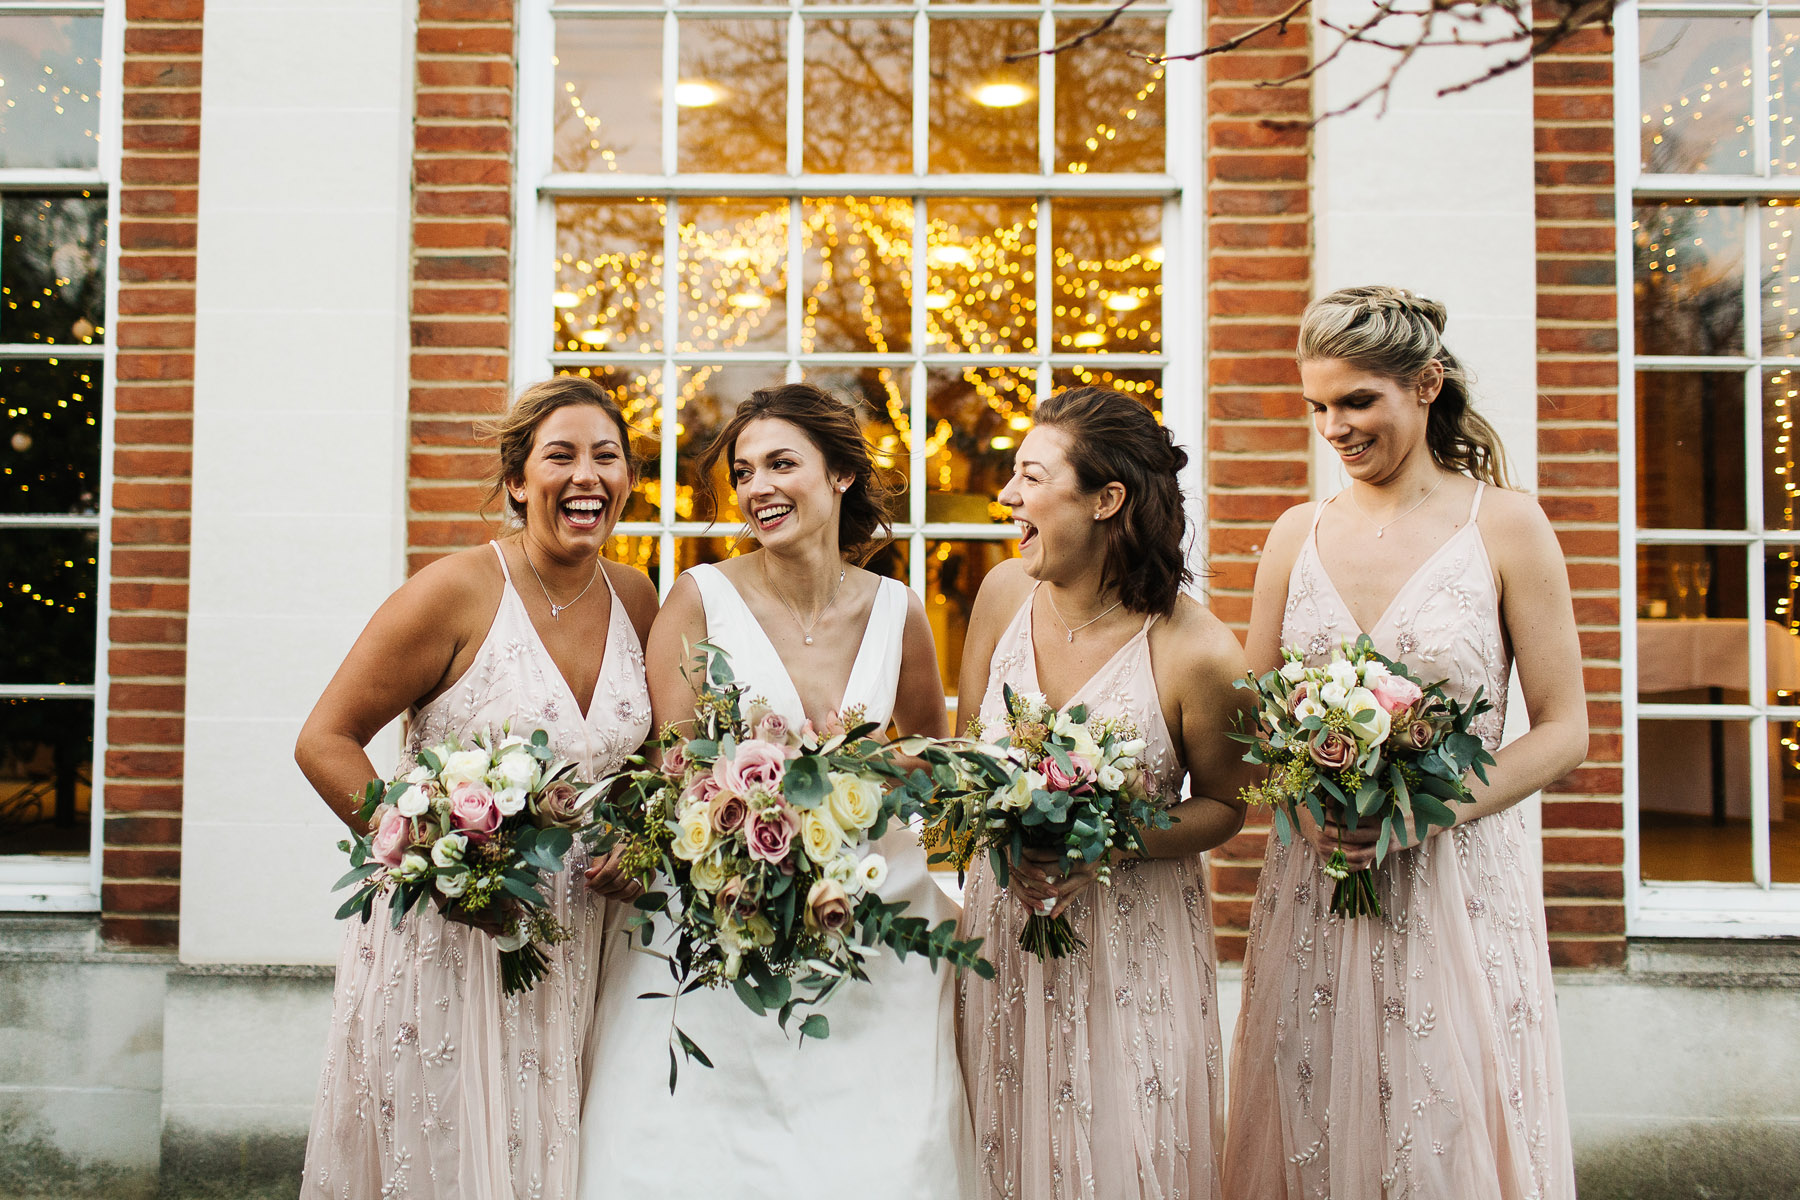 How to dress your bridesmaids 